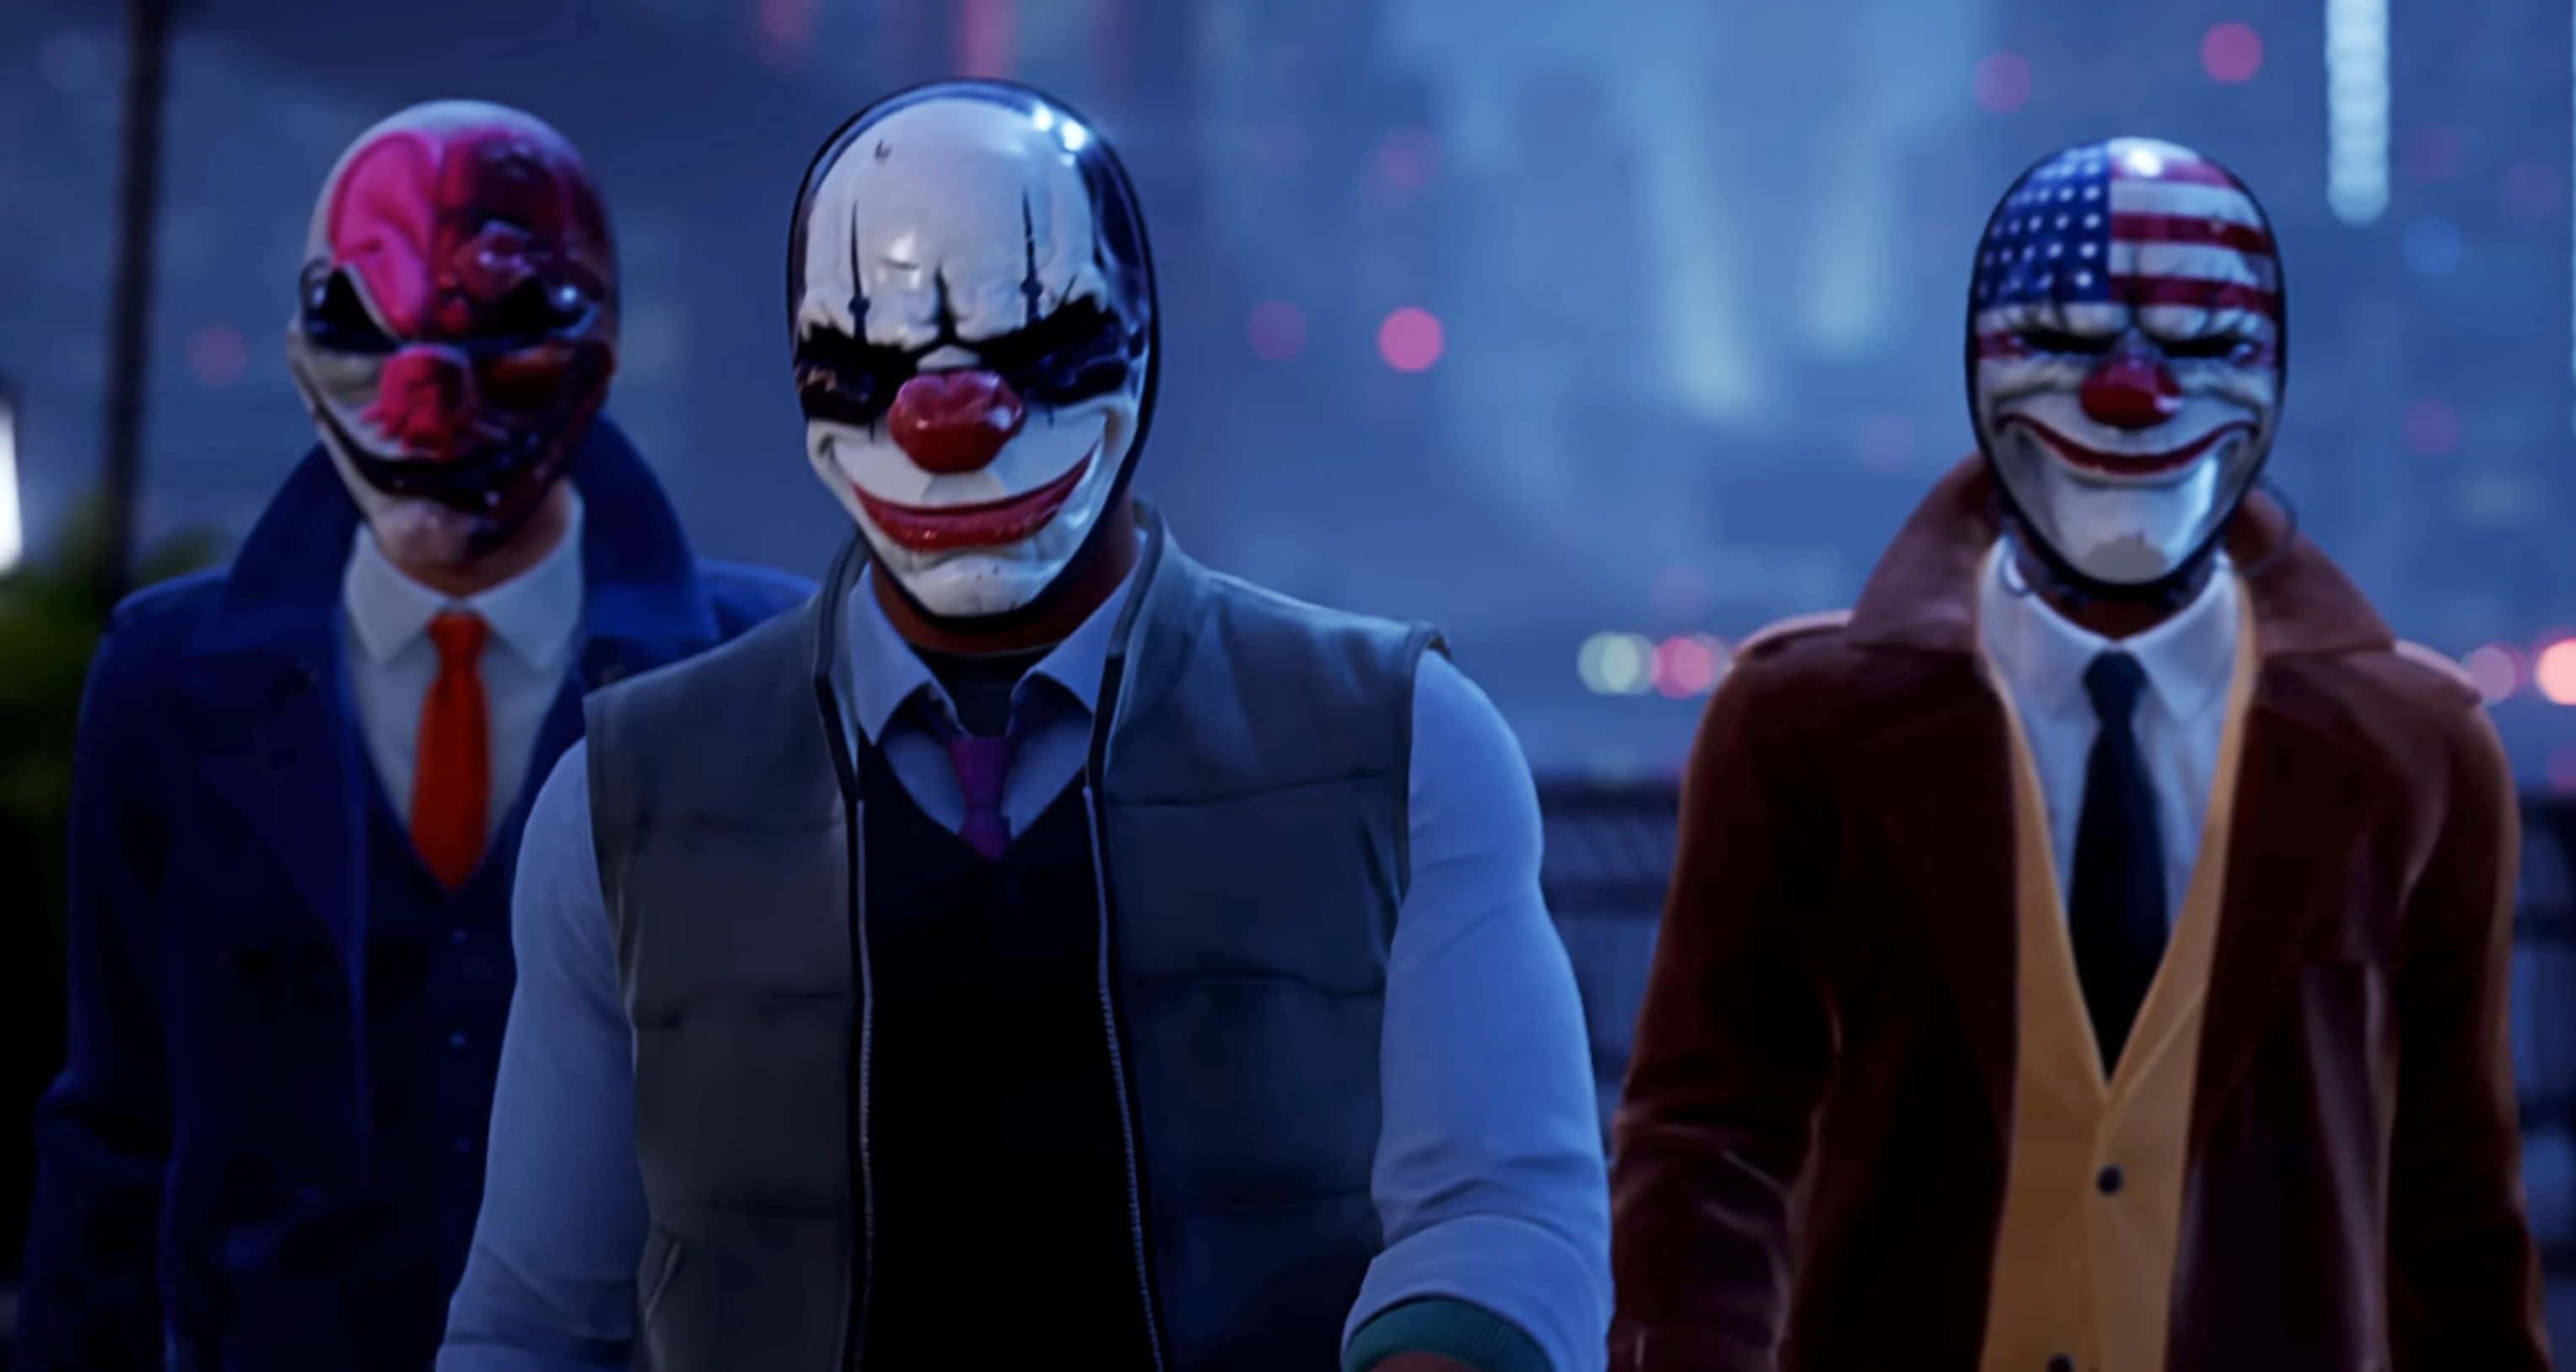 Payday 3 to launch in 2023, teaser trailer confirms